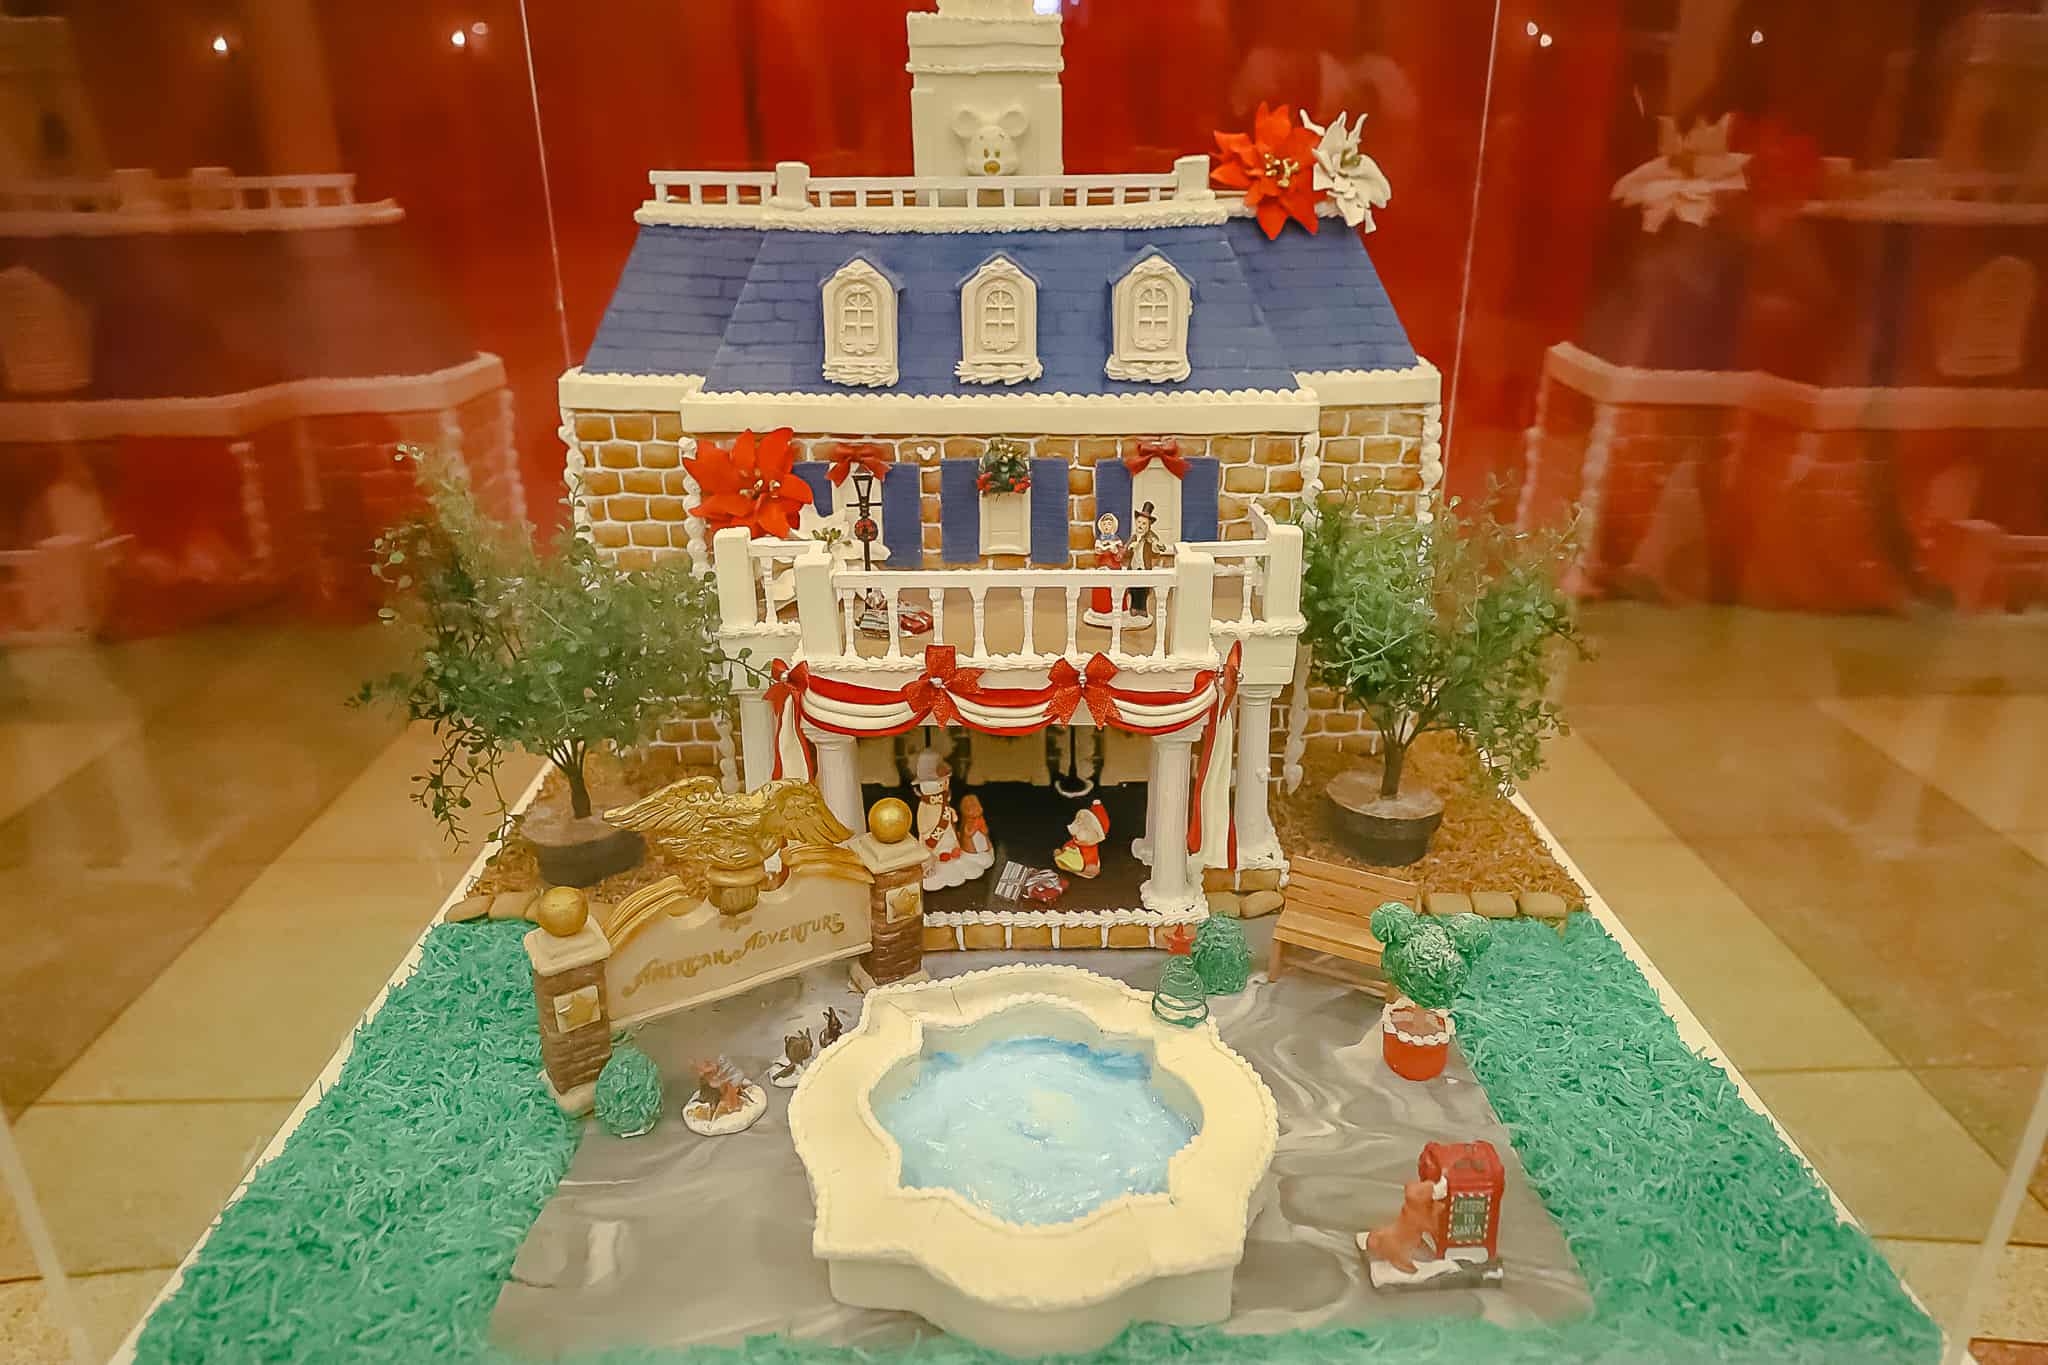 The gingerbread display that's made to look like the American Adventure. 